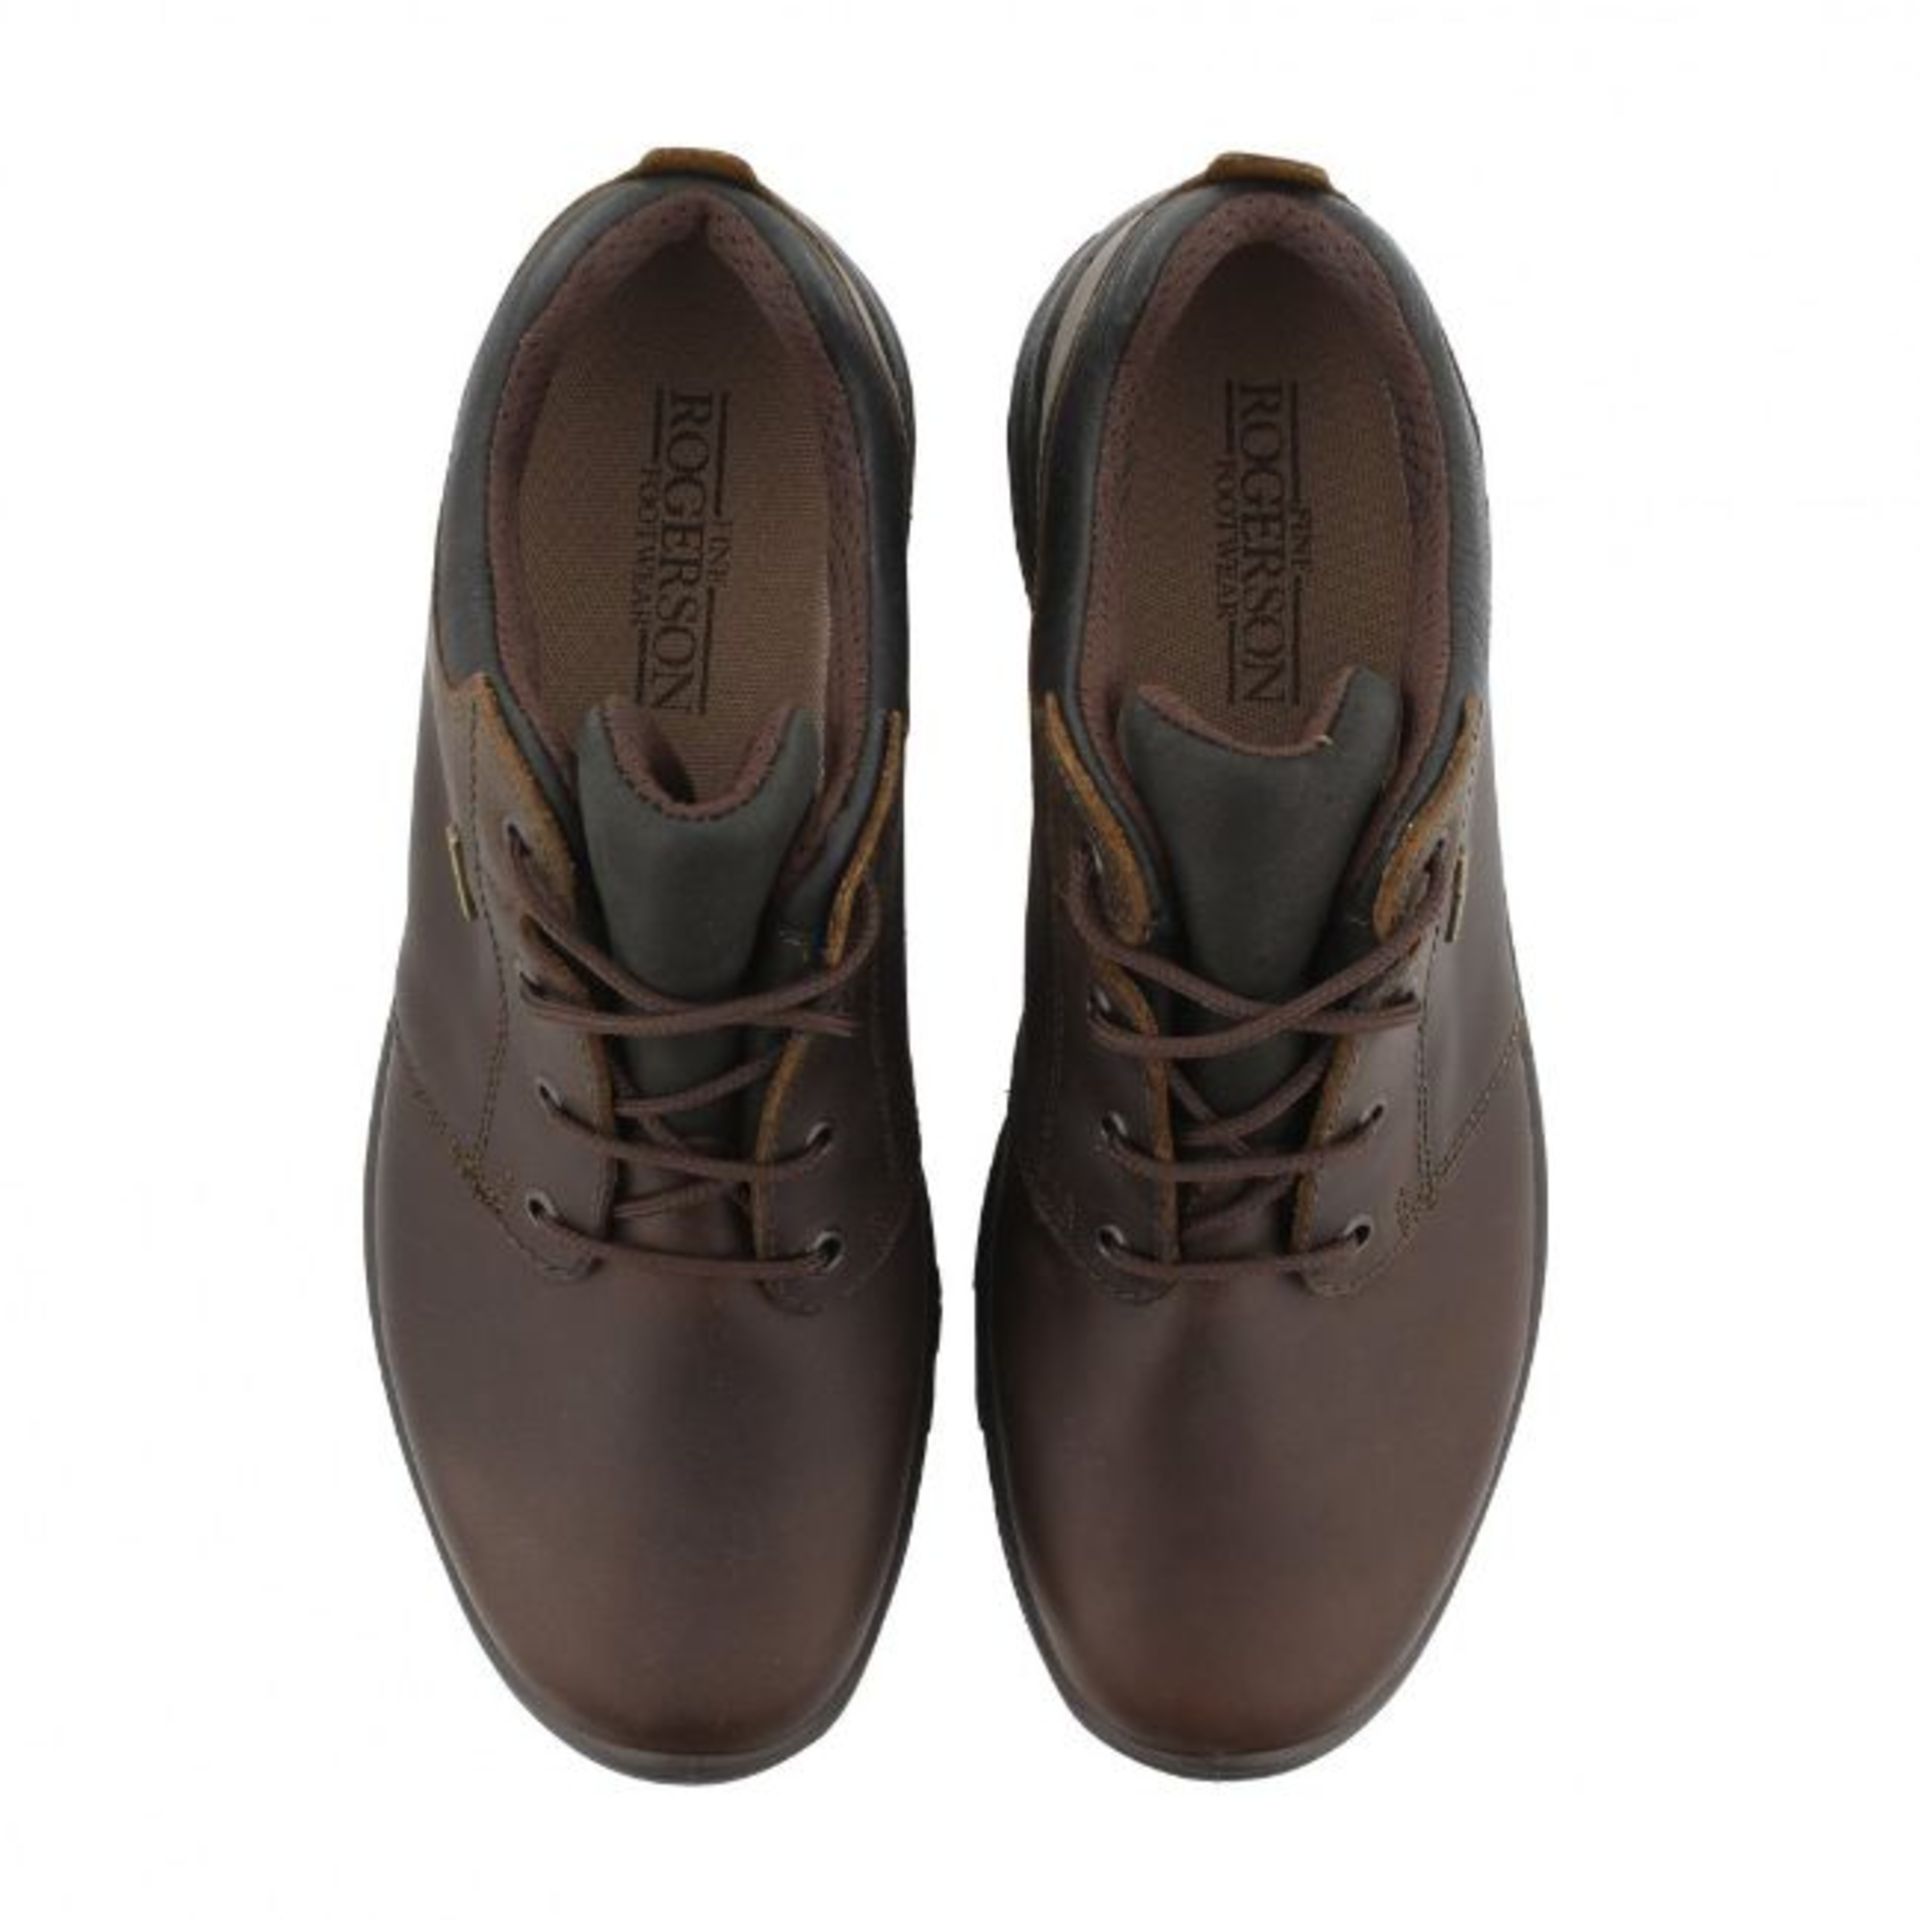 1 x Pair of Men's Grisport Brown Leather GriTex Shoes - Rogerson Footwear - Brand New and Boxed - - Image 8 of 8